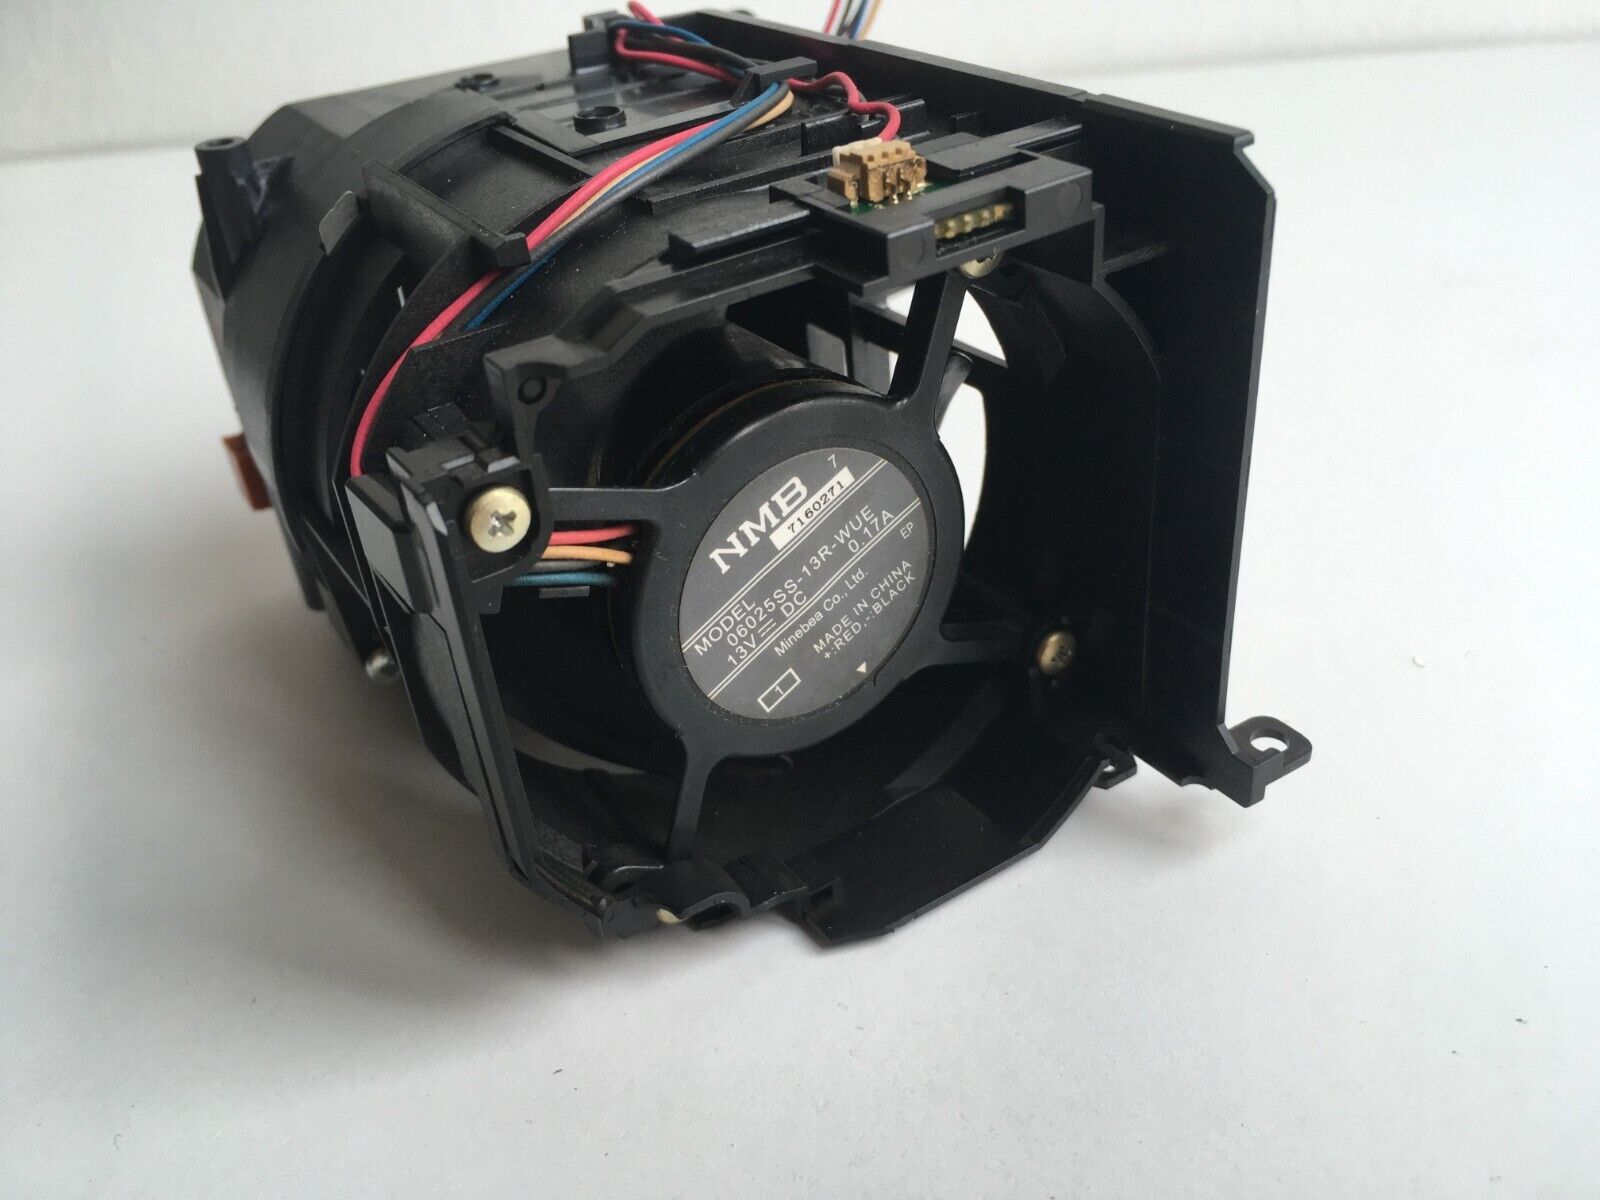 Genuine EPSON EH-TW5300 3LCD Full HD Projector Front Fan Assembly Part